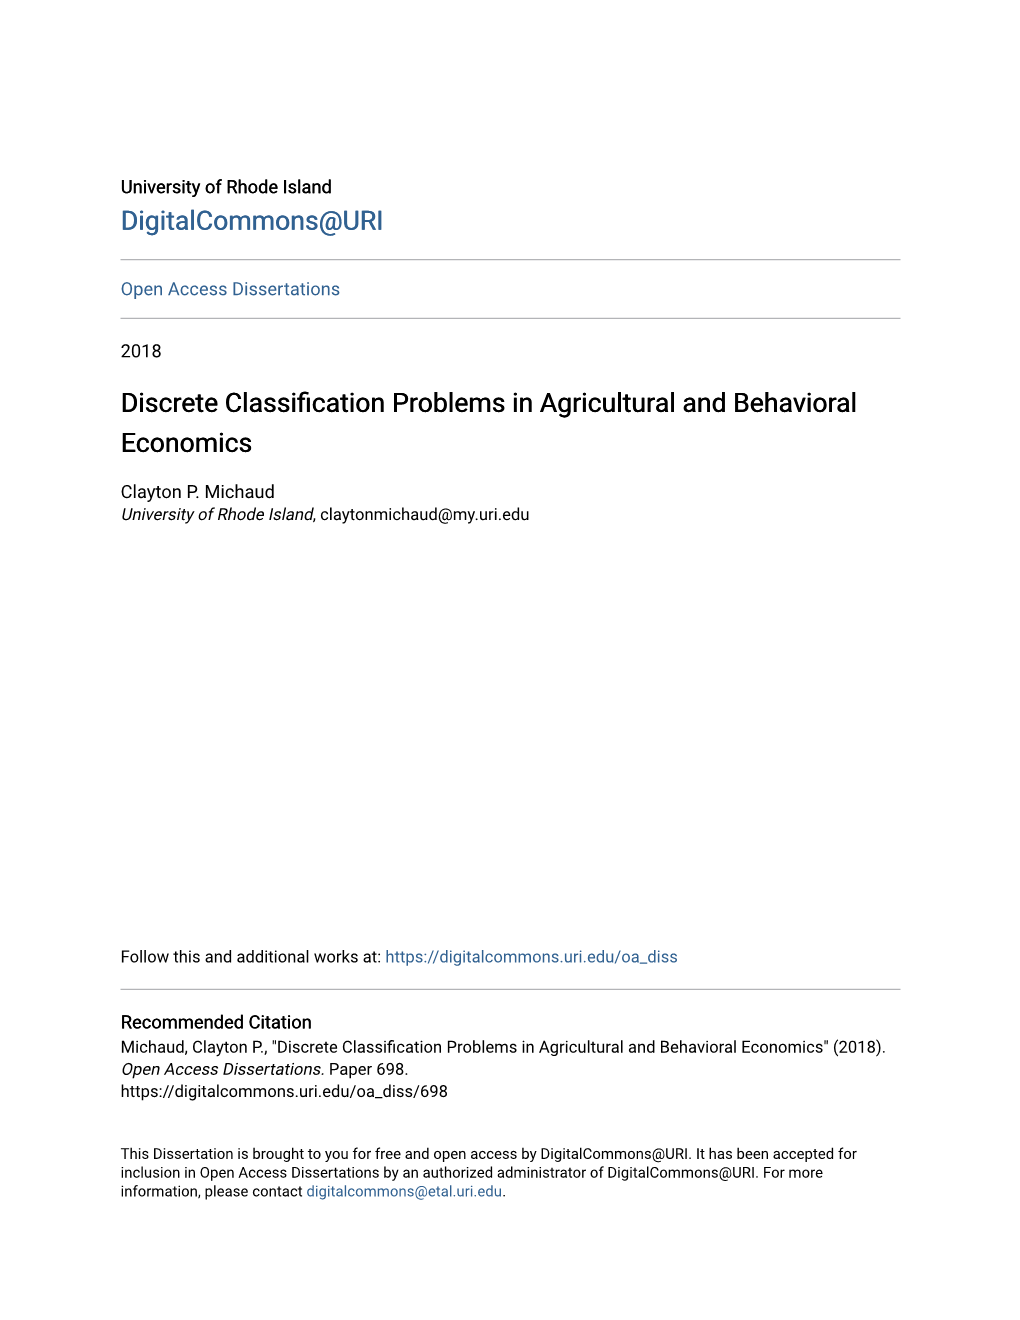 Discrete Classification Problems in Agricultural and Behavioral Economics